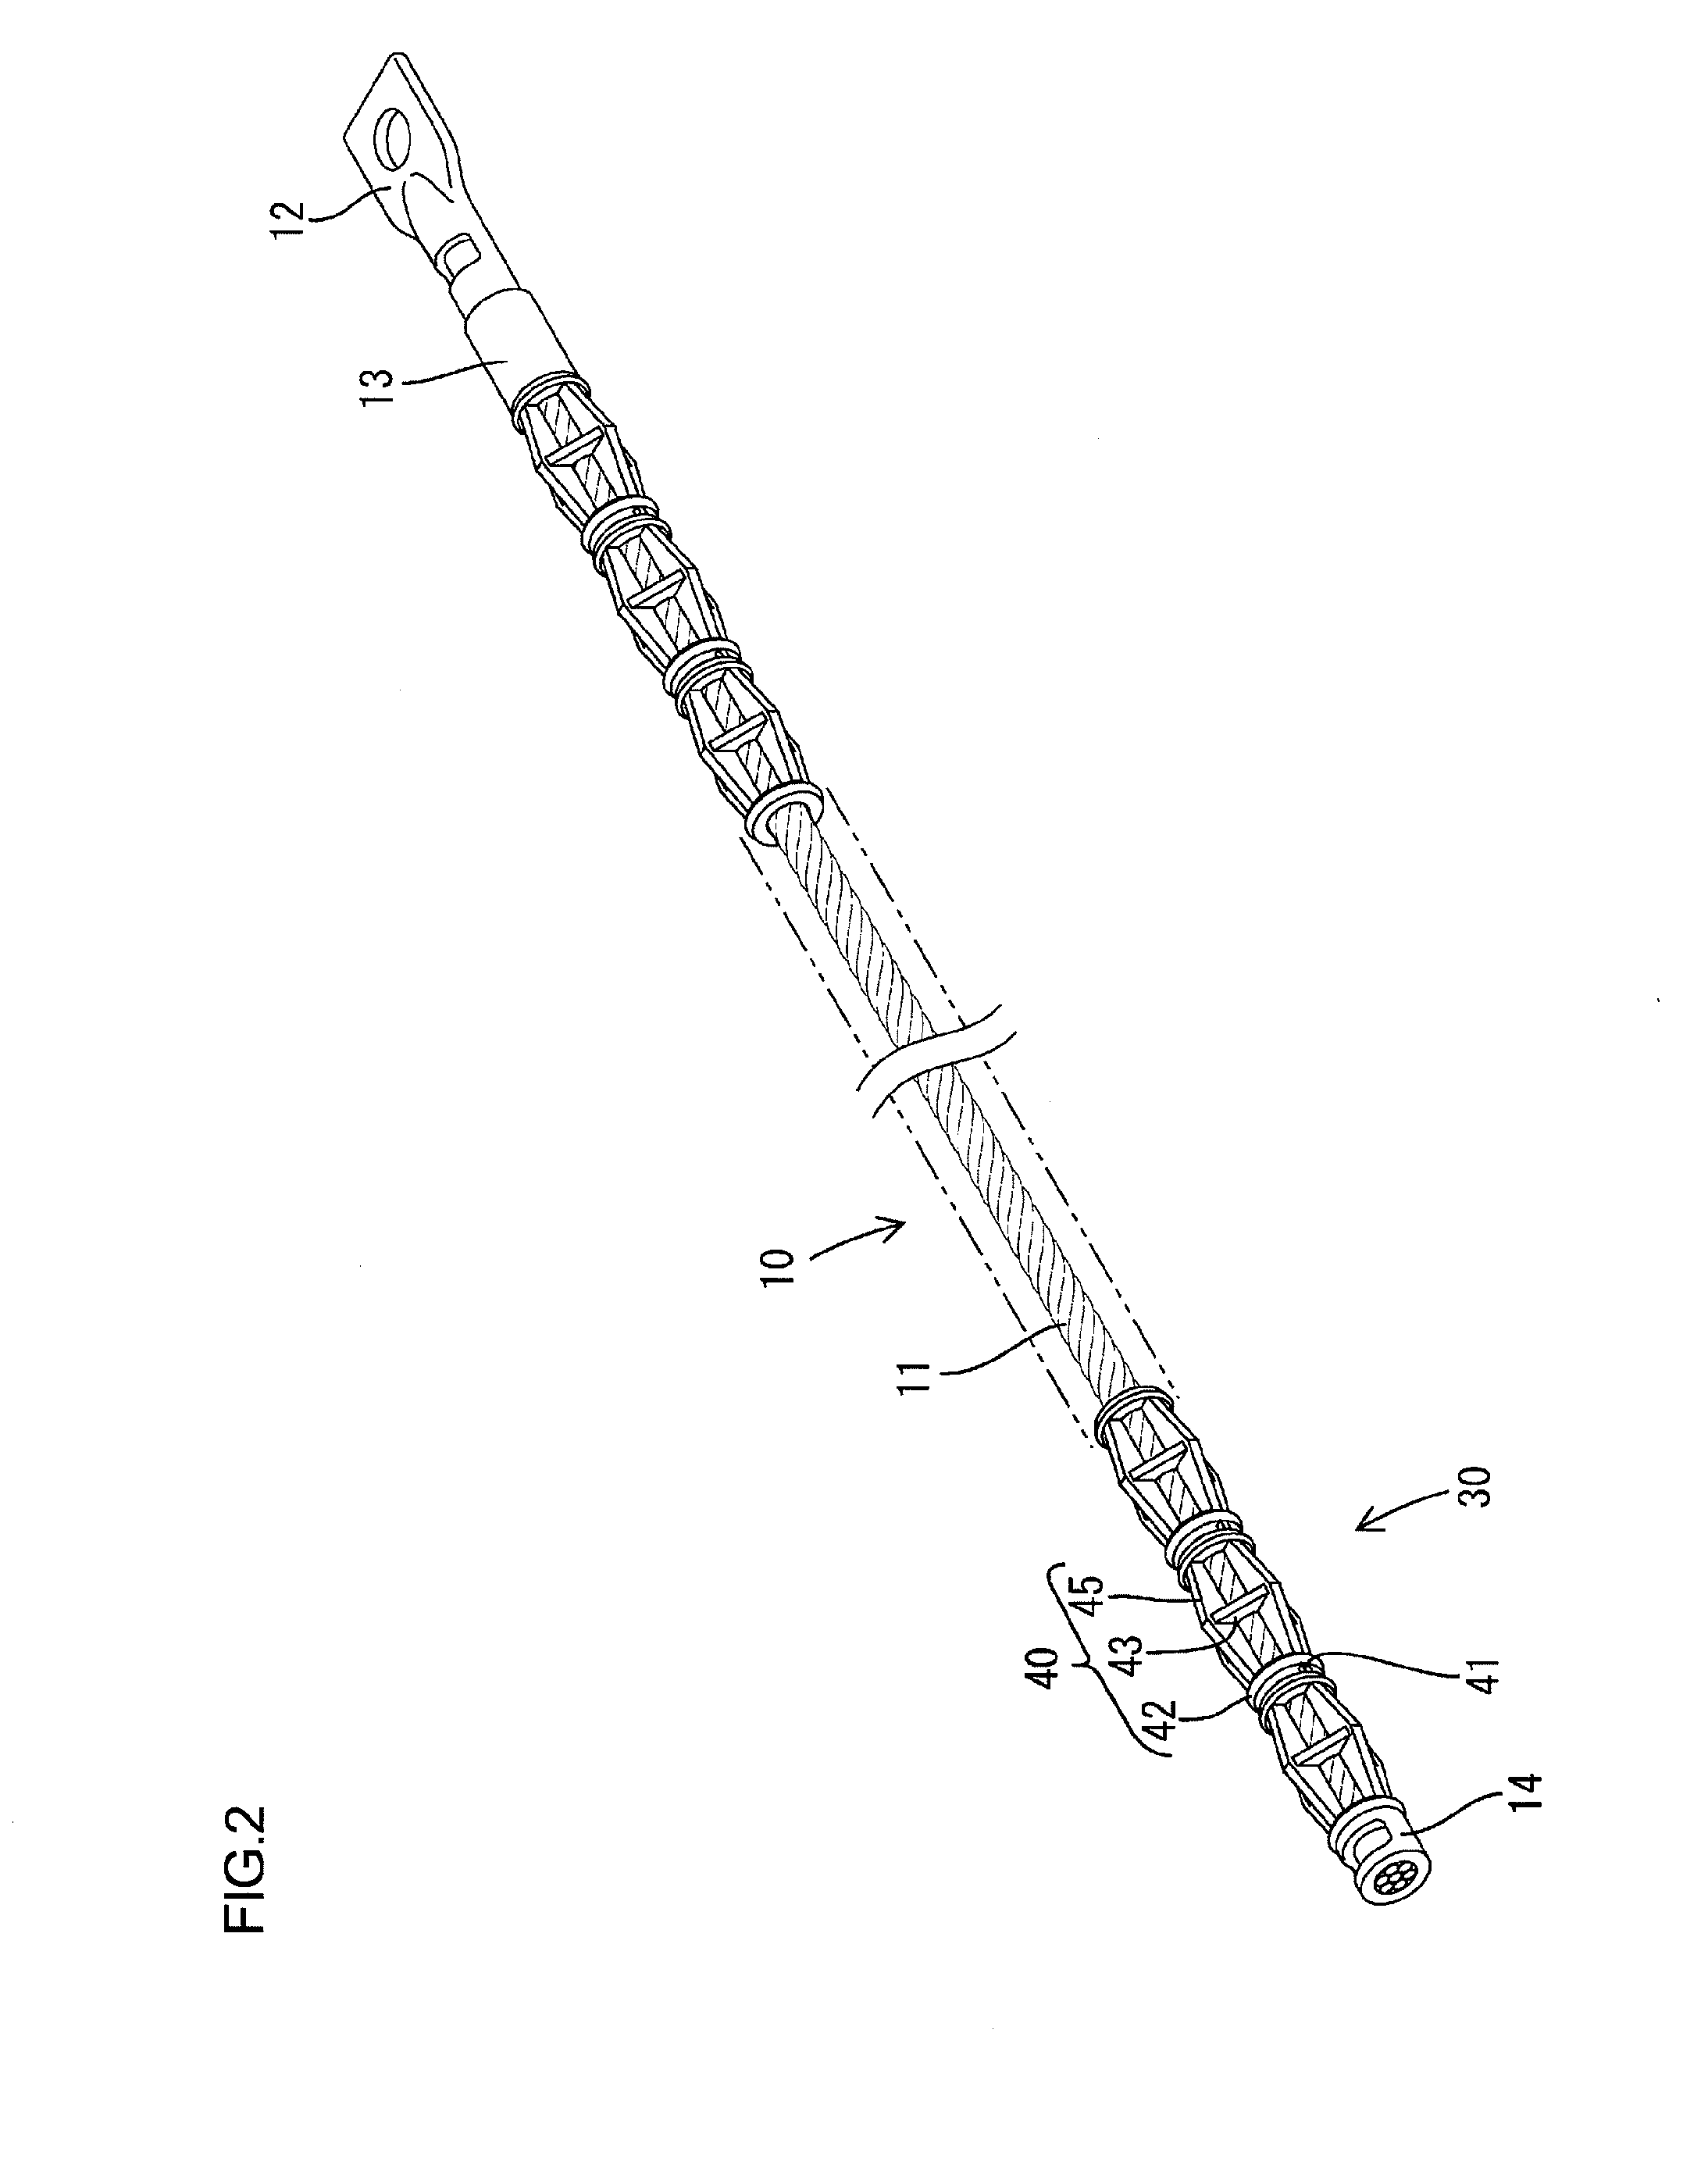 Insulating spacer for plating inner surface and auxiliary anode unit